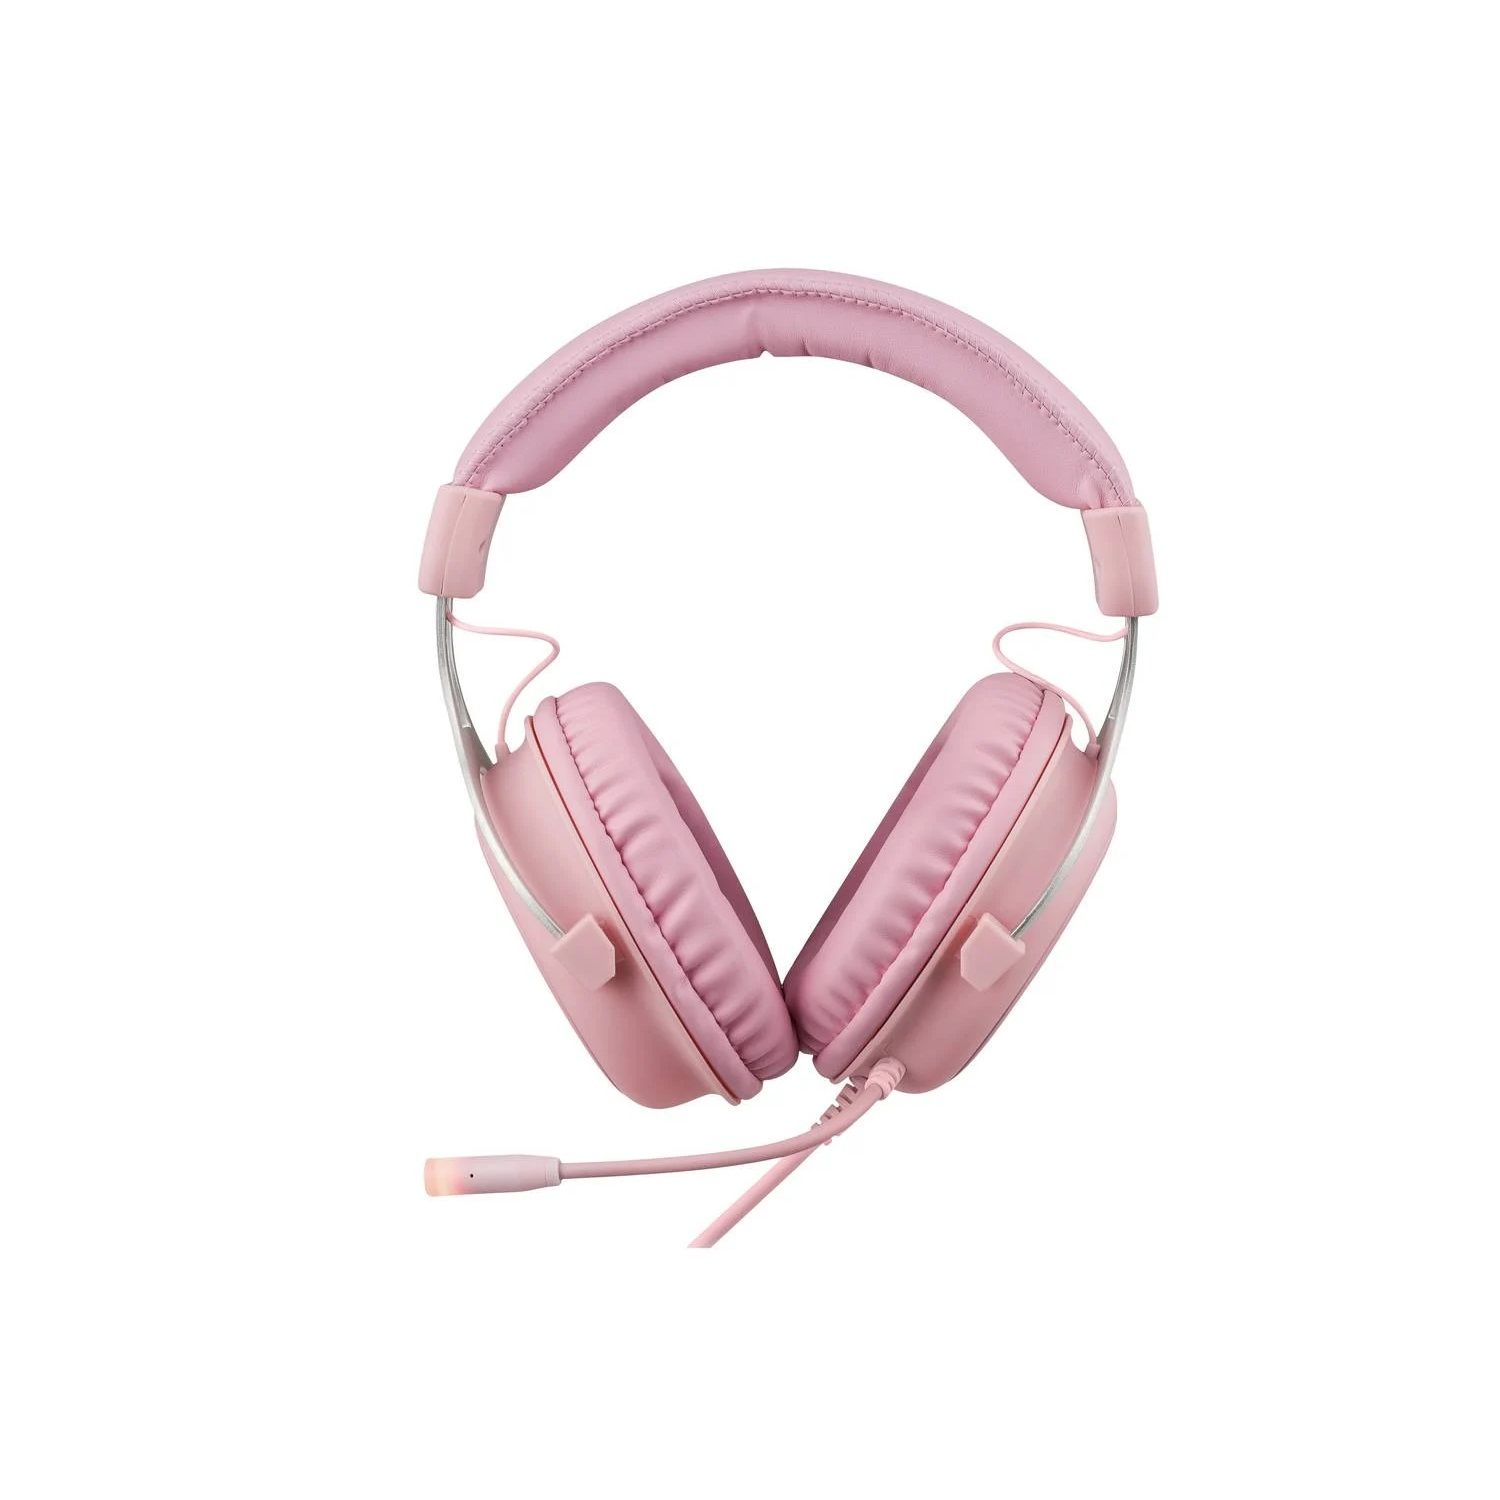 DELTACO GAMING Headset mit Headset Gamer Over-ear pink LED-Beleuchtung